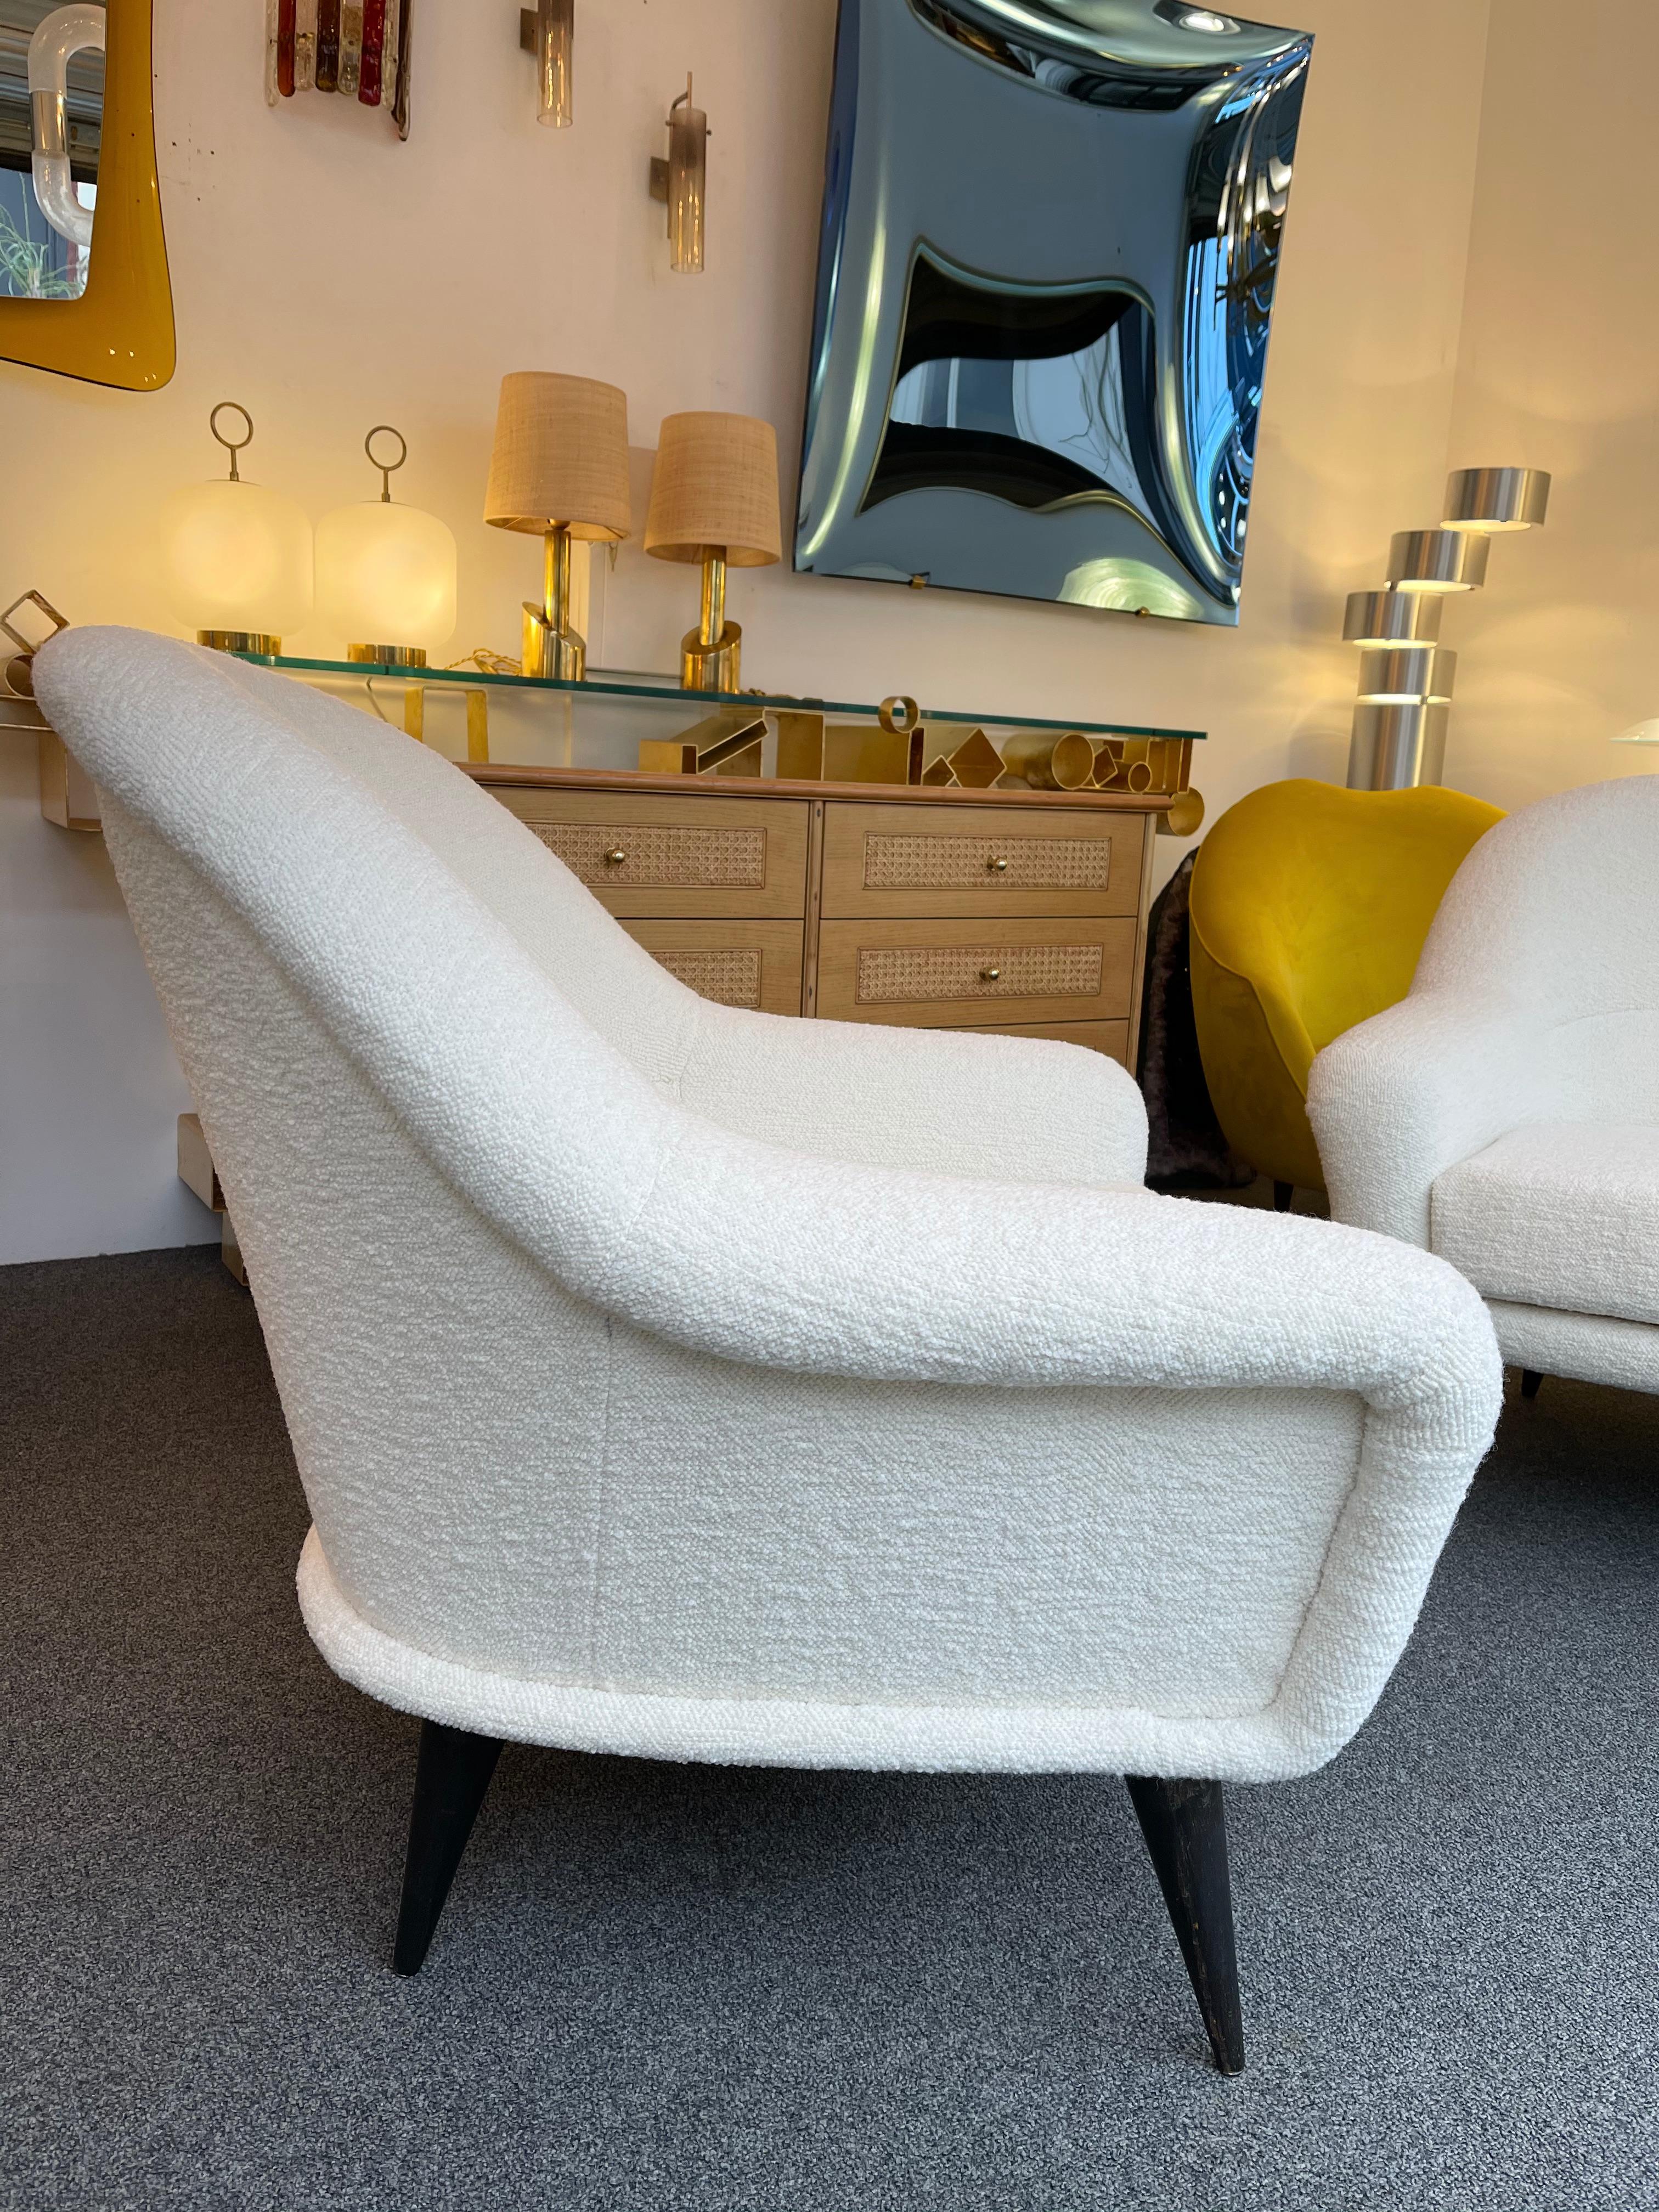 Rare pair of armchairs or lounge chairs by the French designer Charles Ramos, early 1950s, great classical fabrication. Fully upholstered in editor bouclé fabric. Famous design like Gio Ponti, Gianfranco Frattini, Cassina, Osvaldo Borsani, Joe